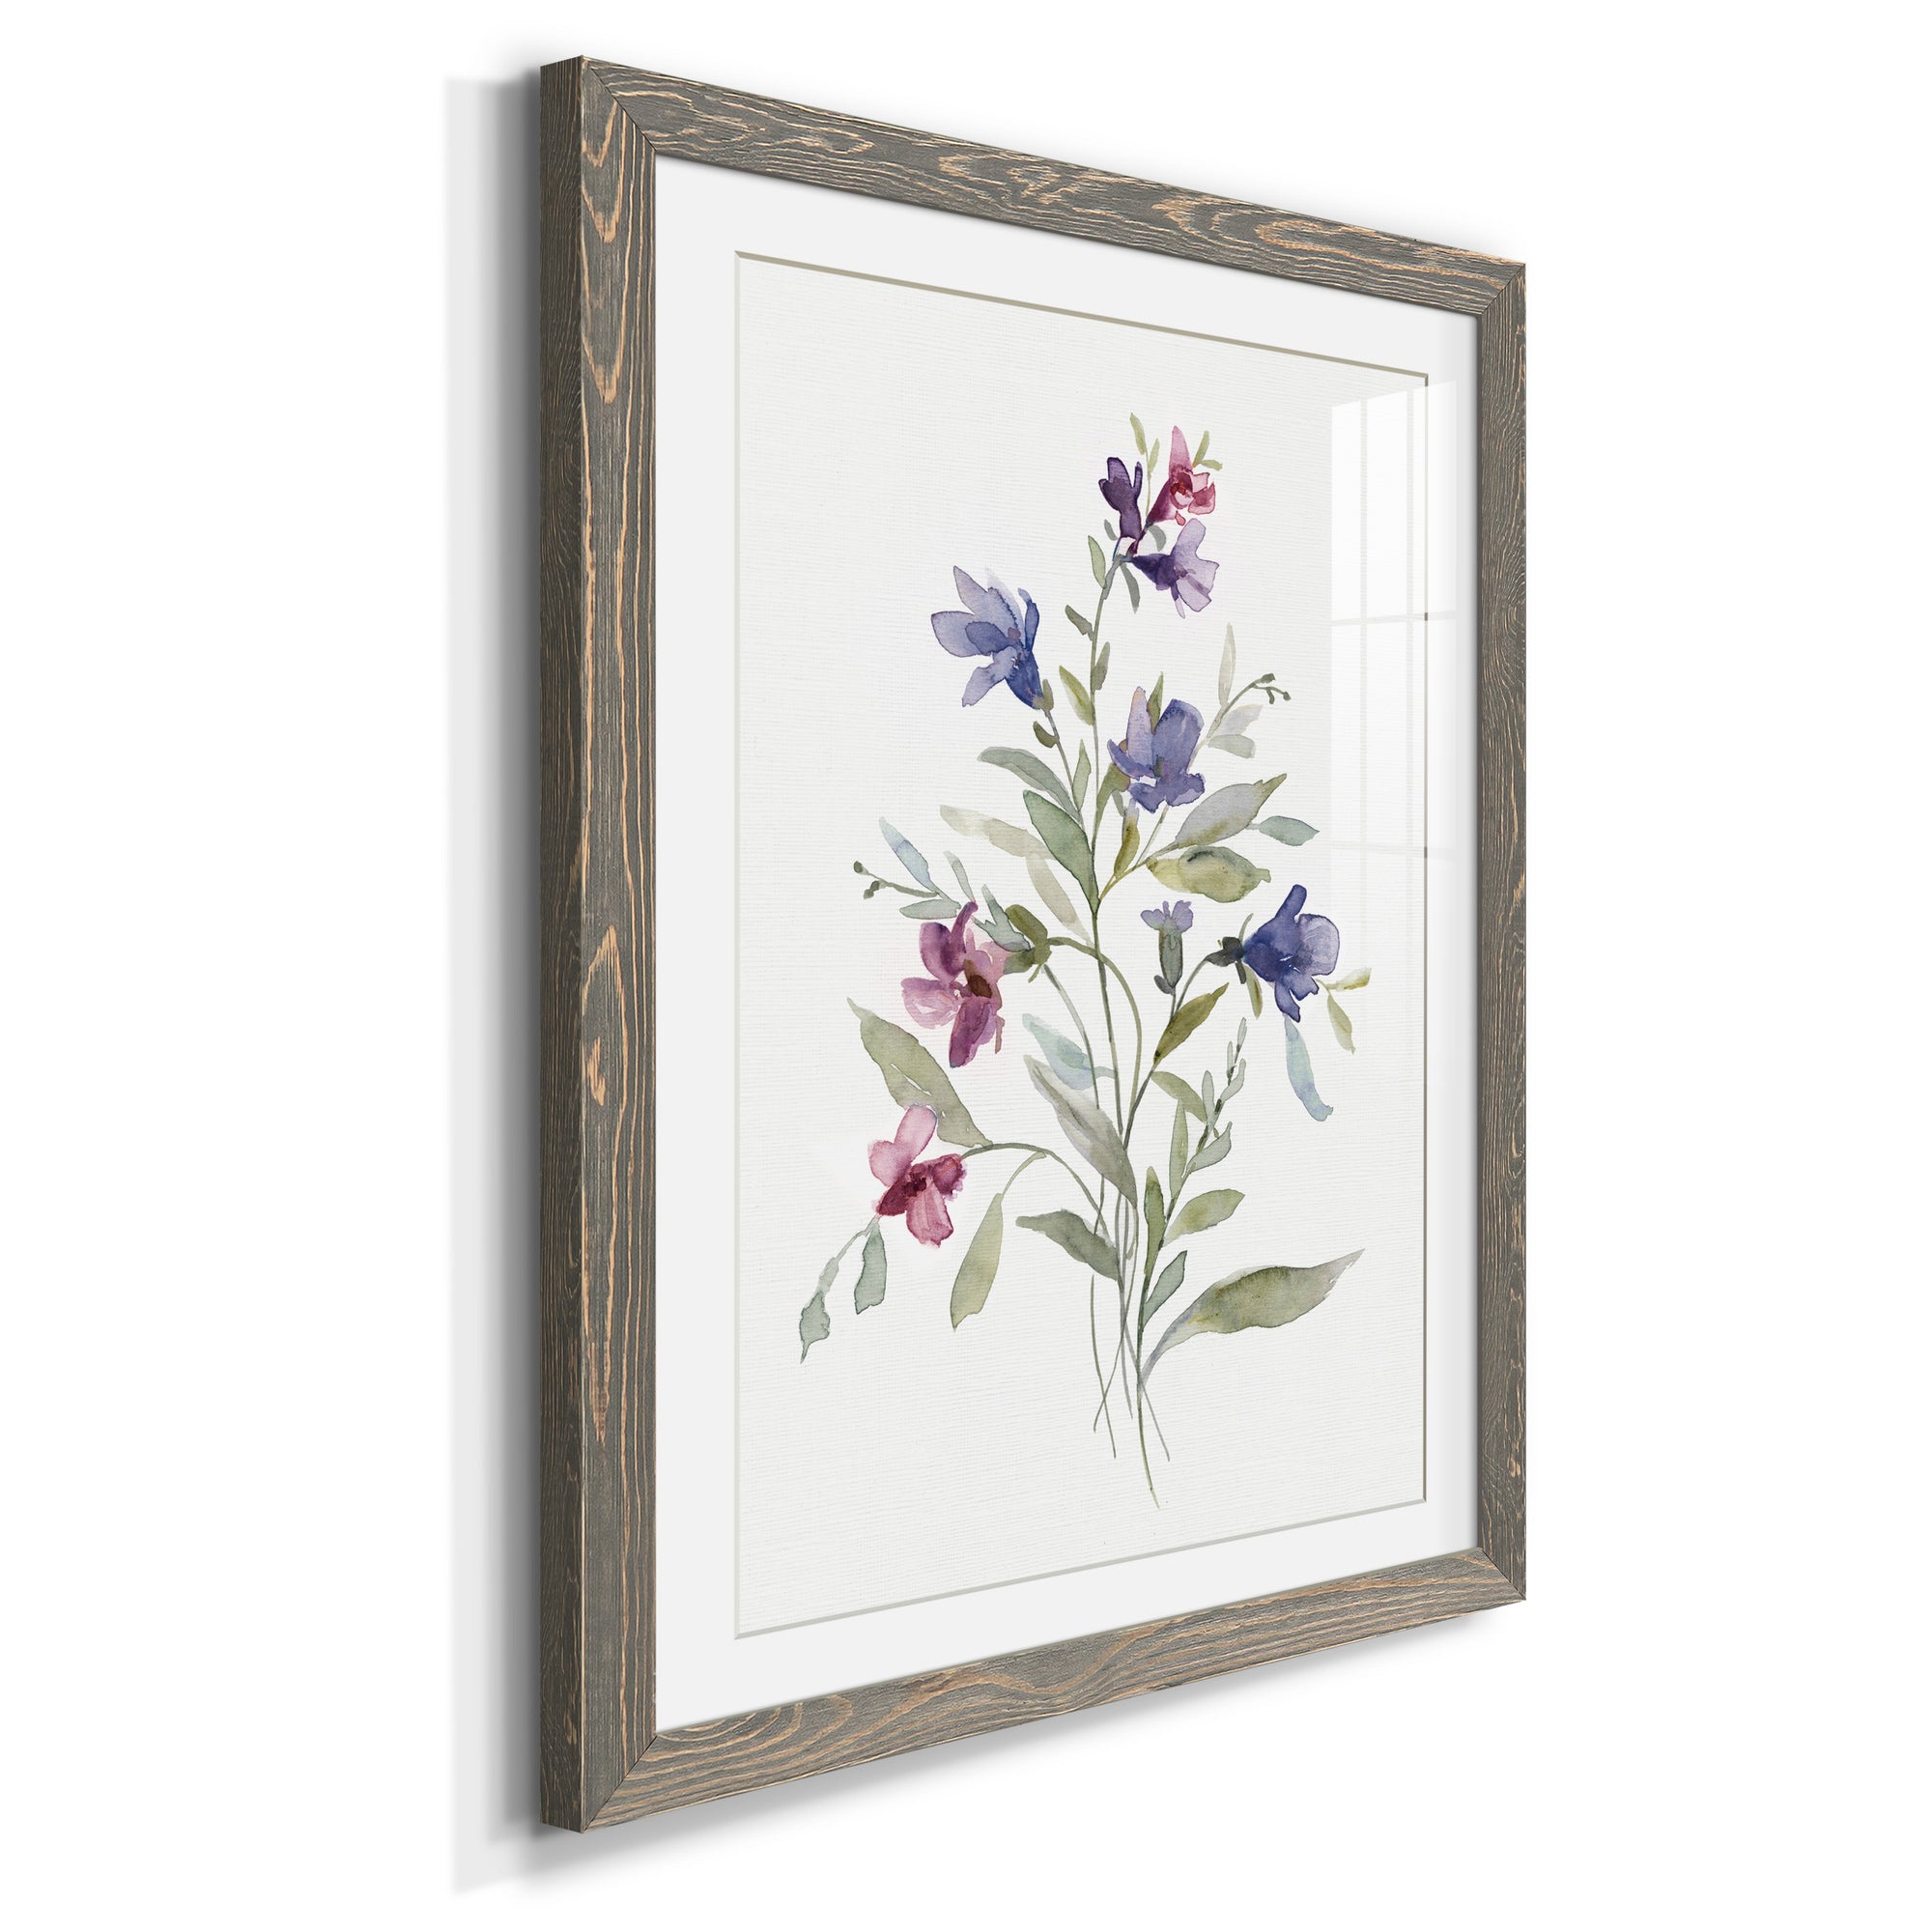 Color Variety III - Premium Framed Print - Distressed Barnwood Frame - Ready to Hang